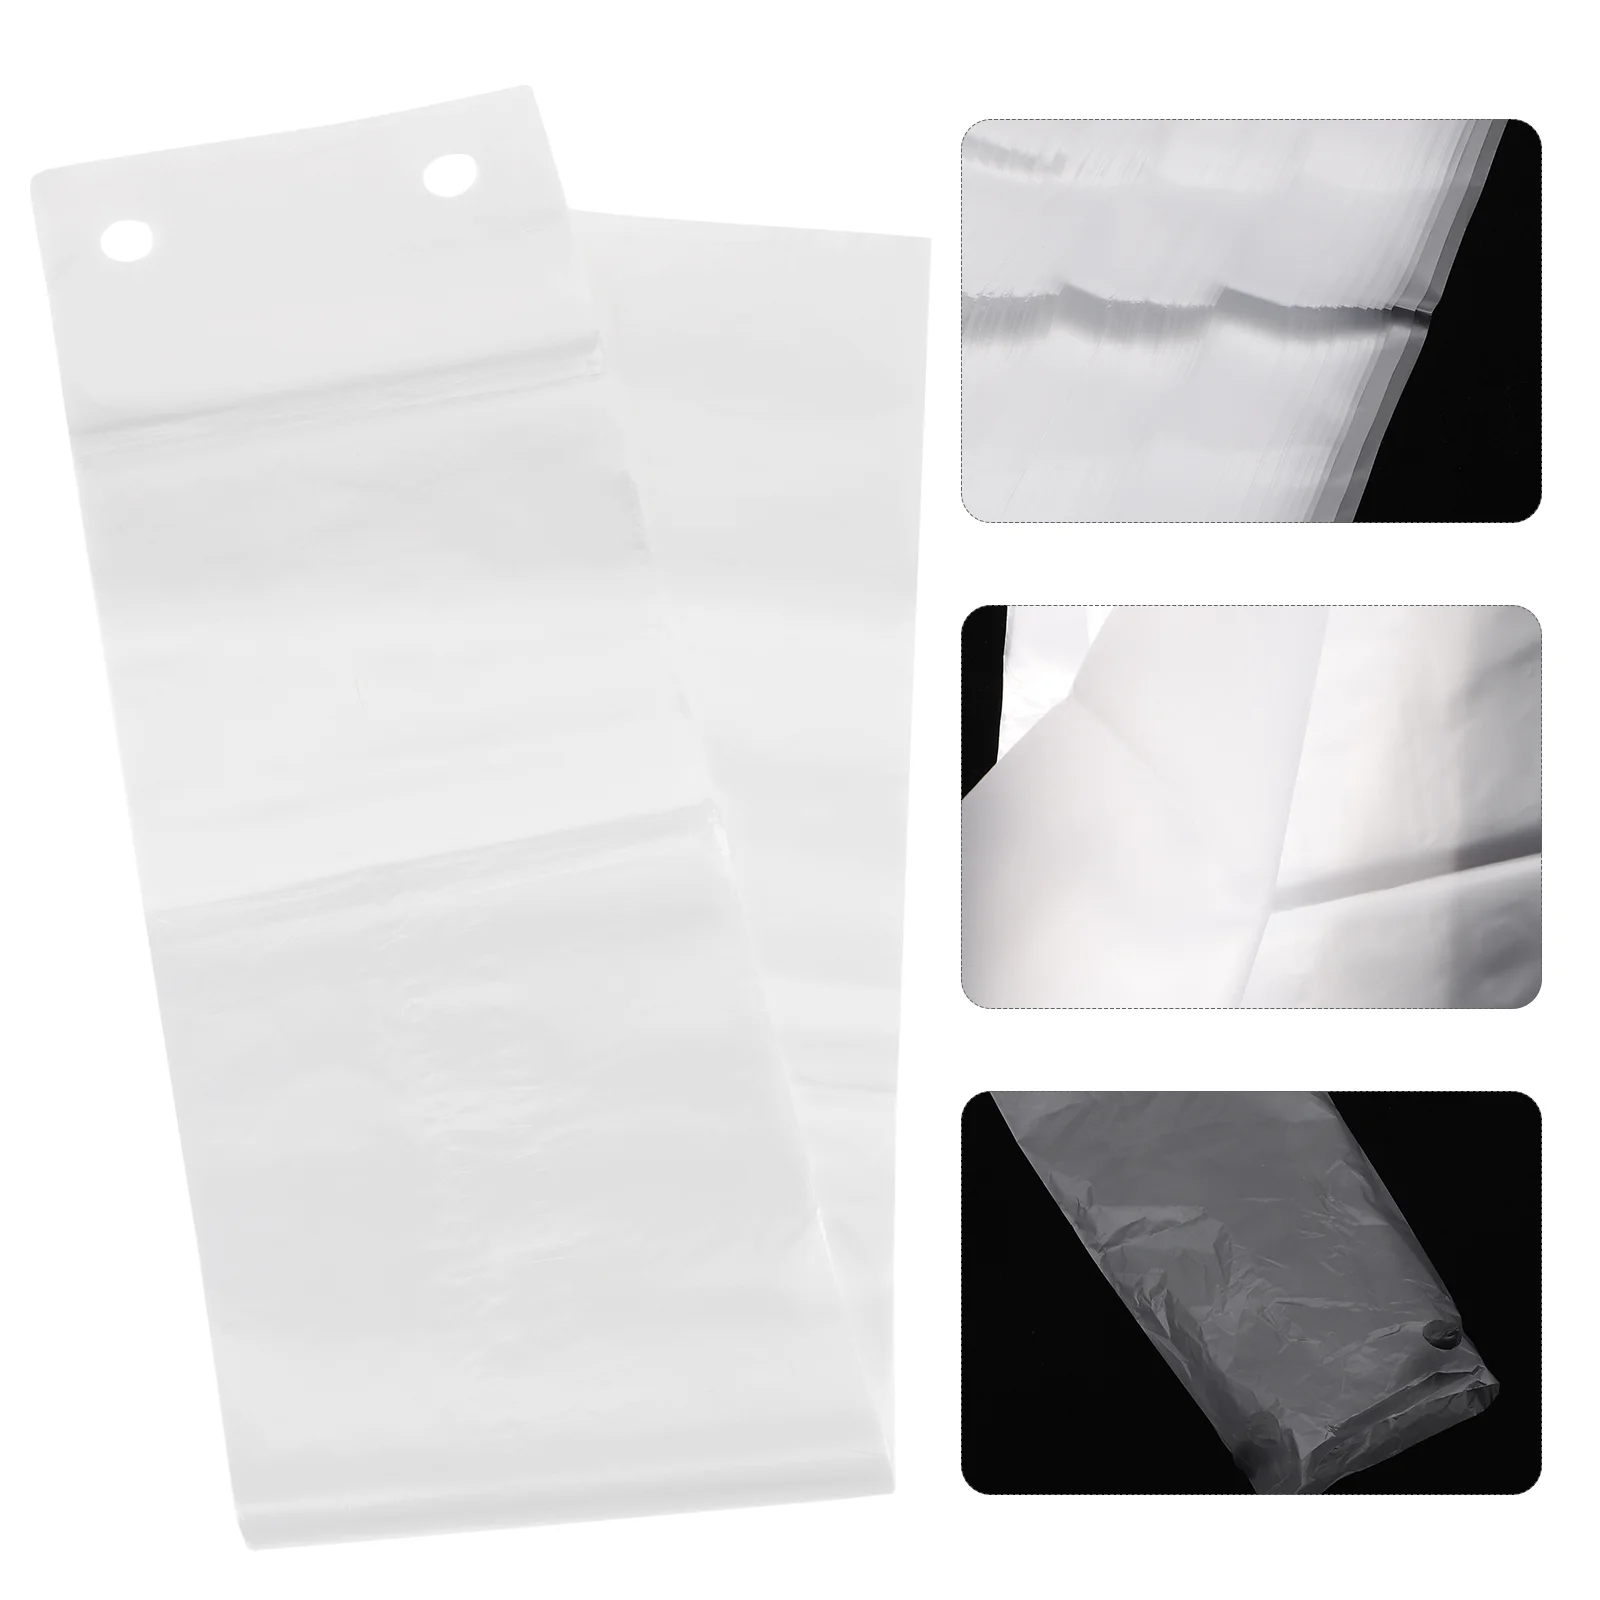 

100pcs Clear Wet Bags Replacement Long Bag Refills Dispenser Sleeves Reduce Rainy Day Cleanup Accidents